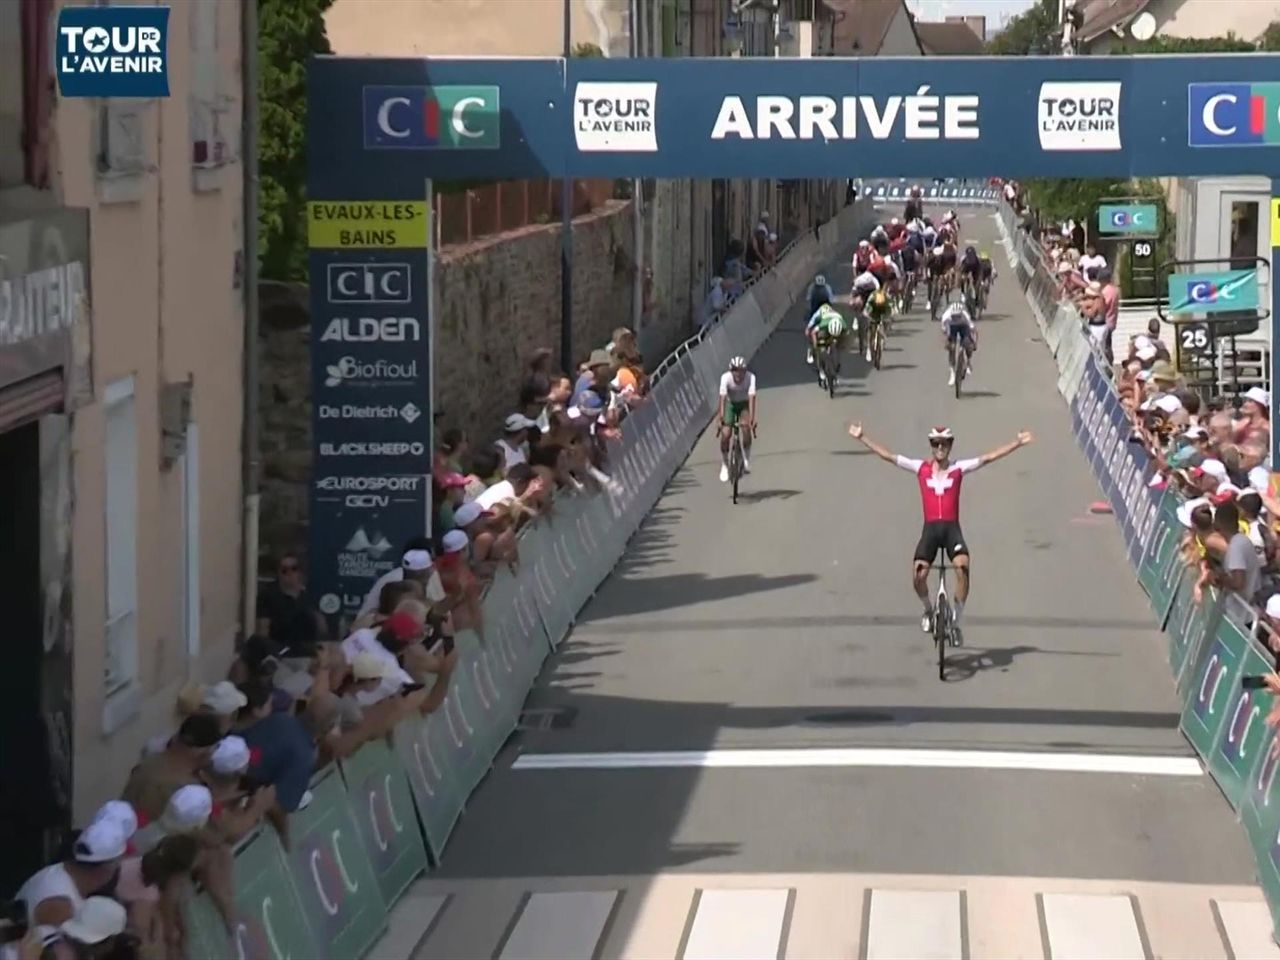 Hes found something special - Fabio Christen takes Stage 4 victory of Tour de lAvenir - Cycling video